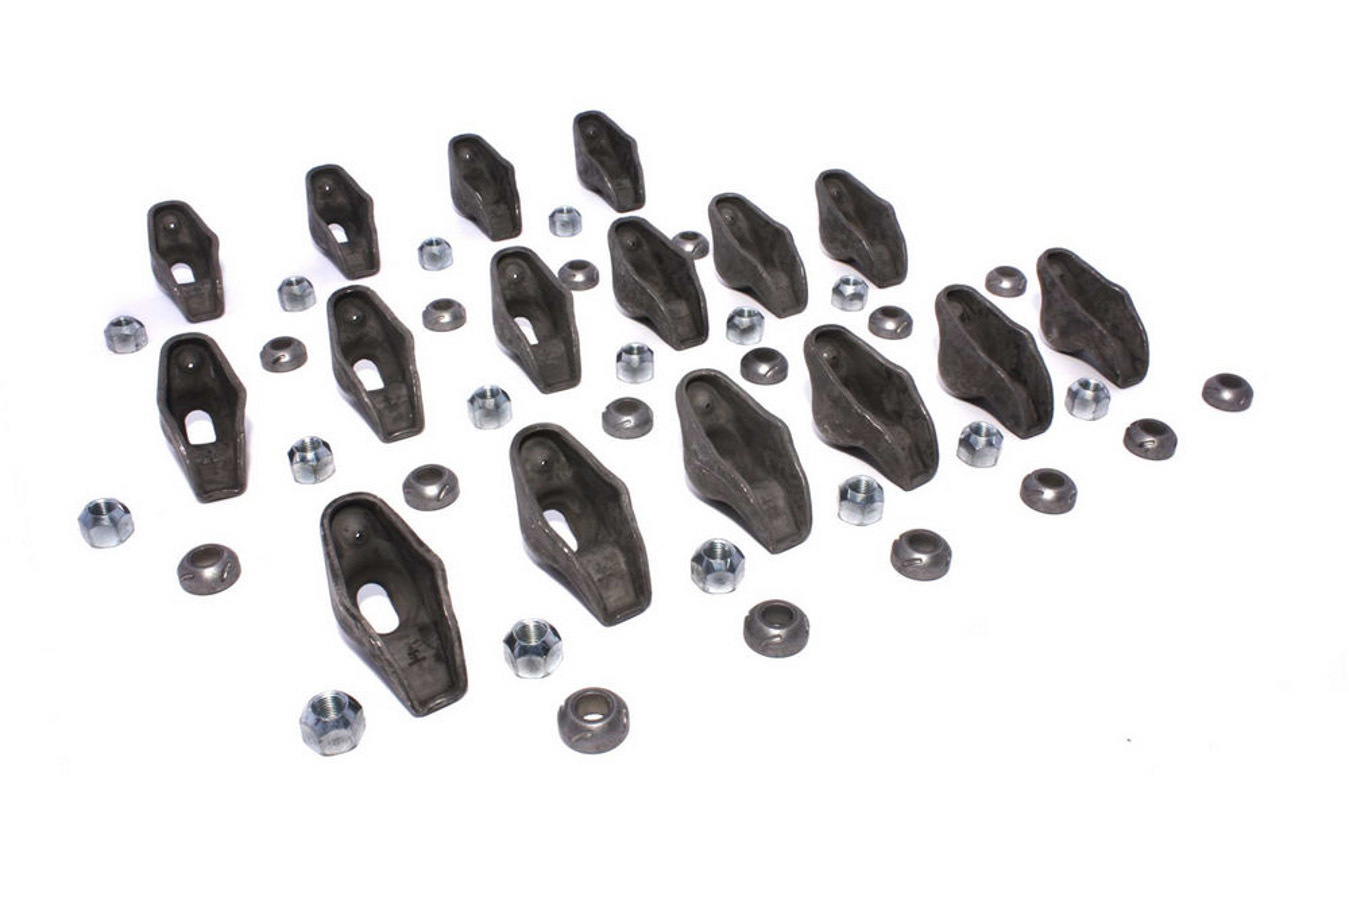 Comp Cams 1218-16 Rocker Arm, High Energy, 3/8 in Stud Mount, 1.60 Ratio, OEM / Long Slot, Nitride Steel, Small Block Chevy, Set of 16